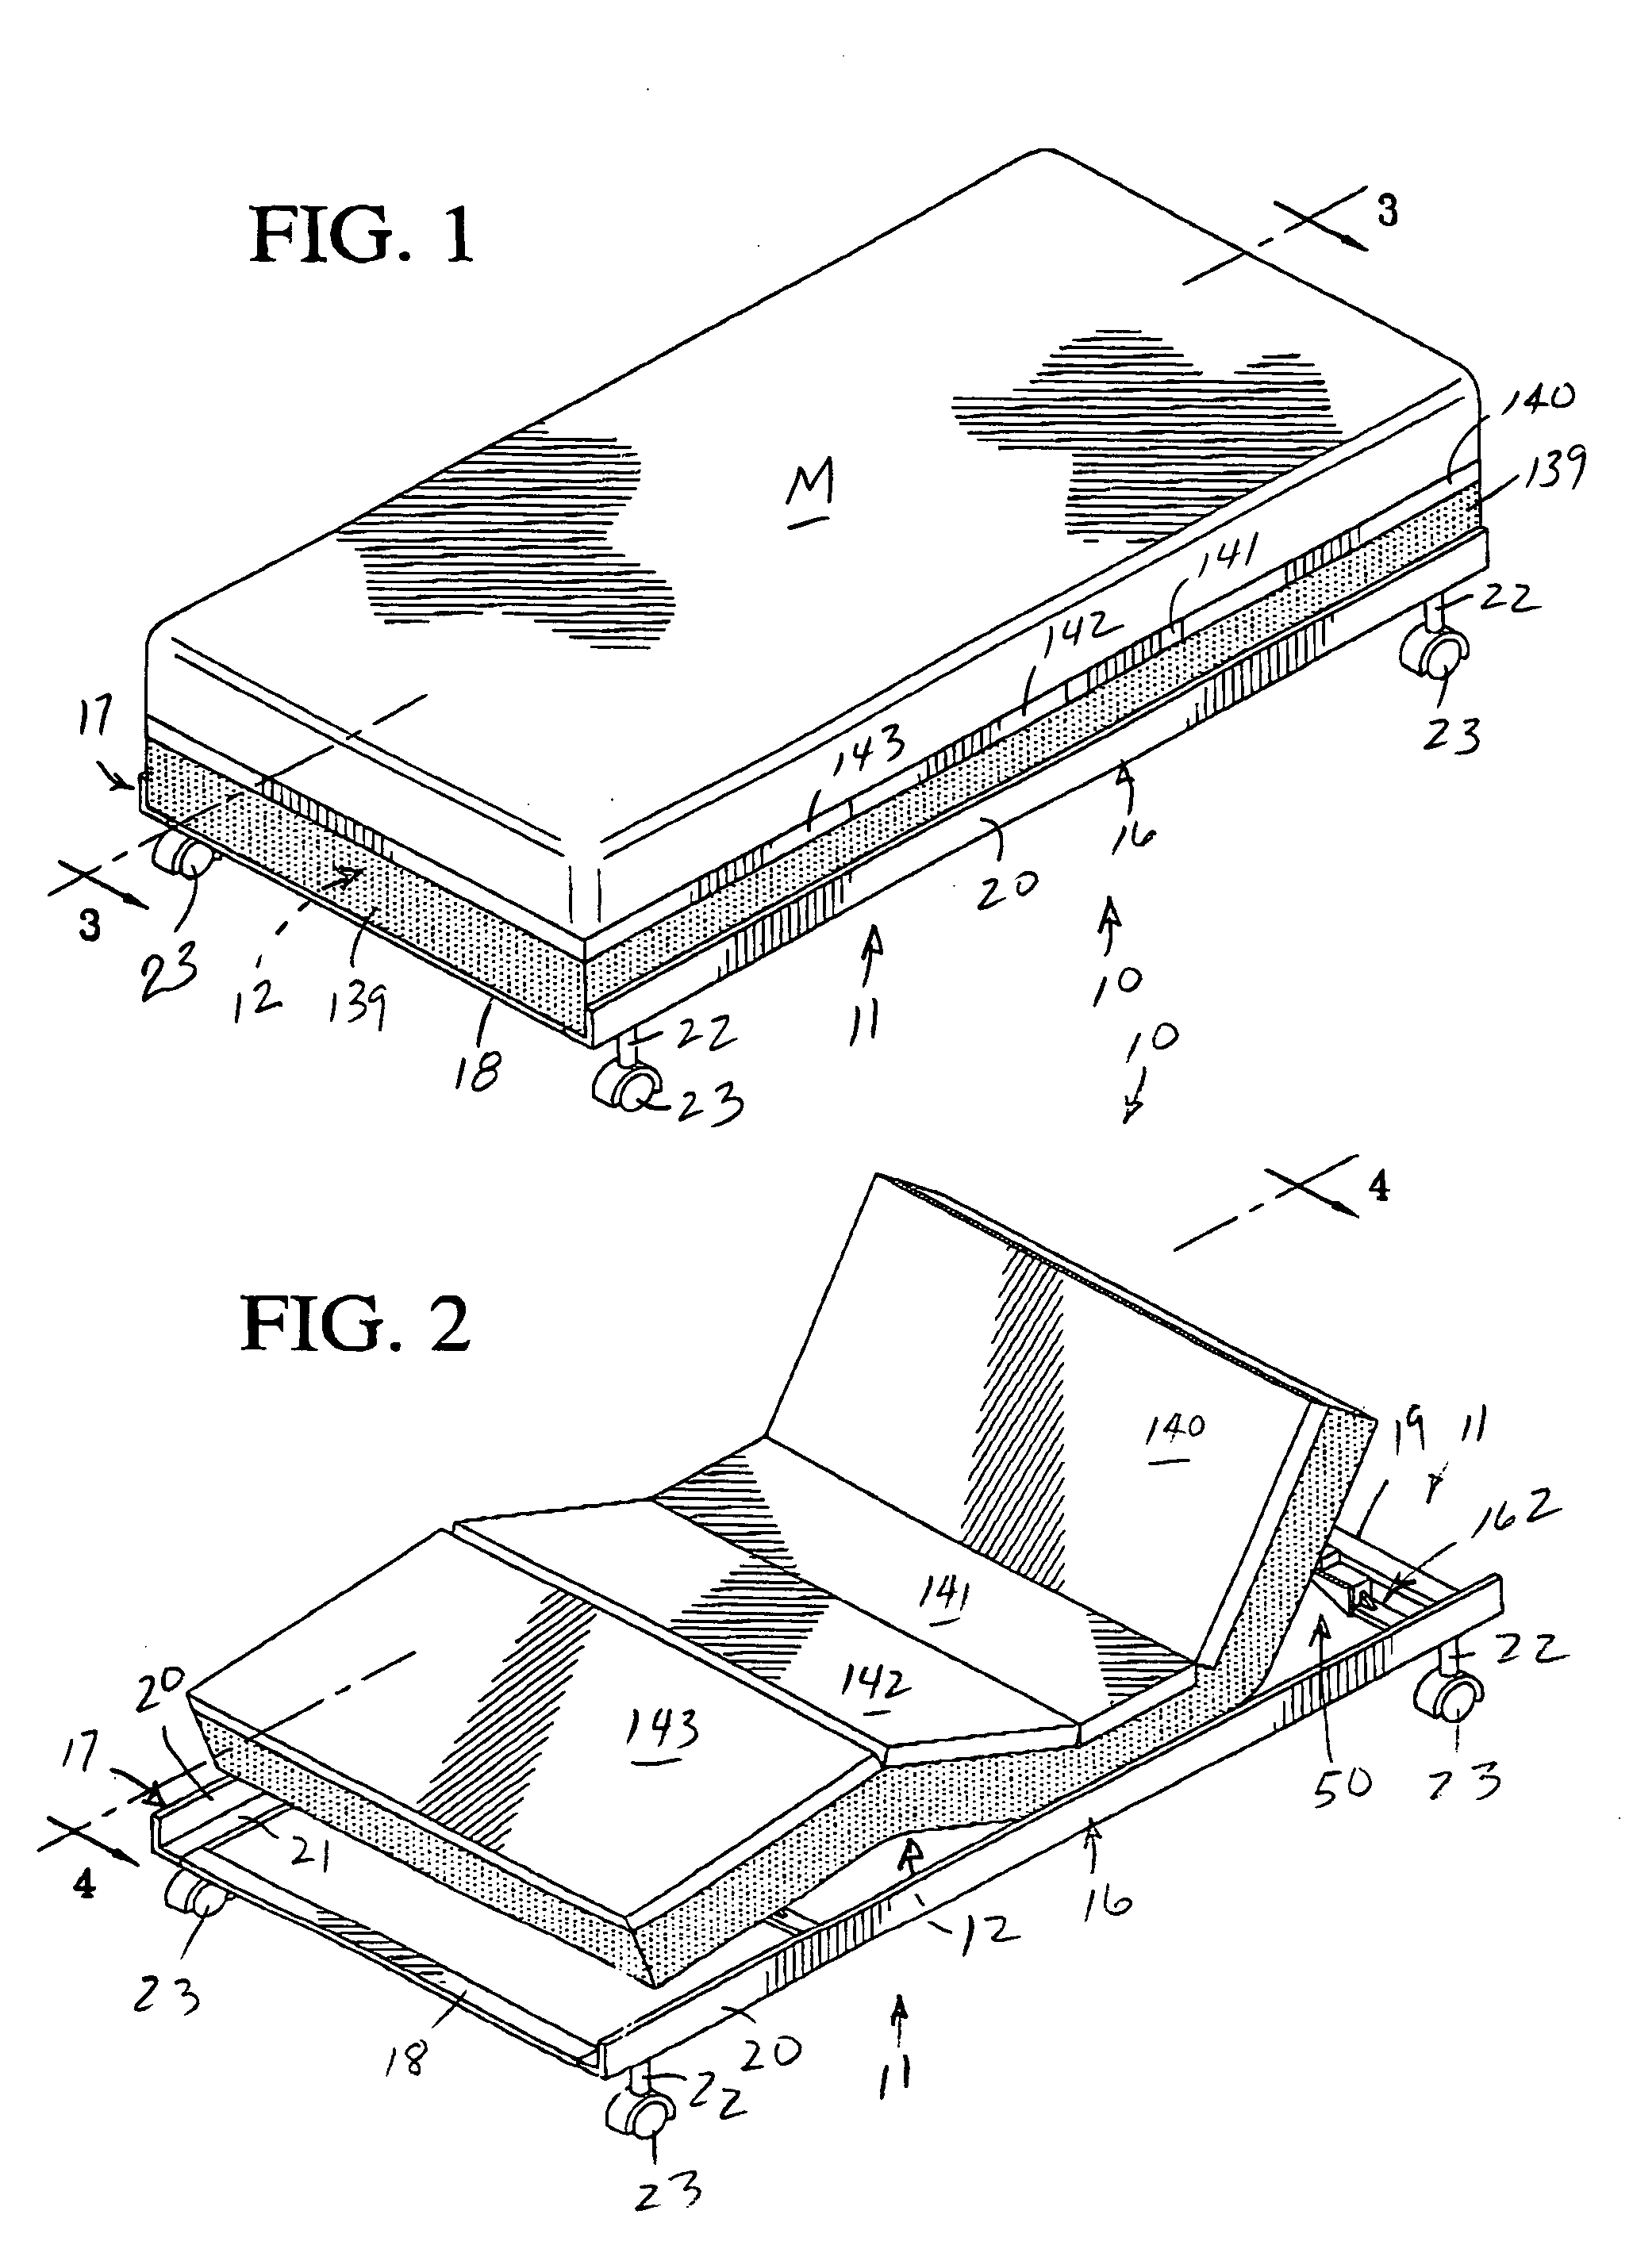 Adjustable base for supporting adjustable beds of different widths